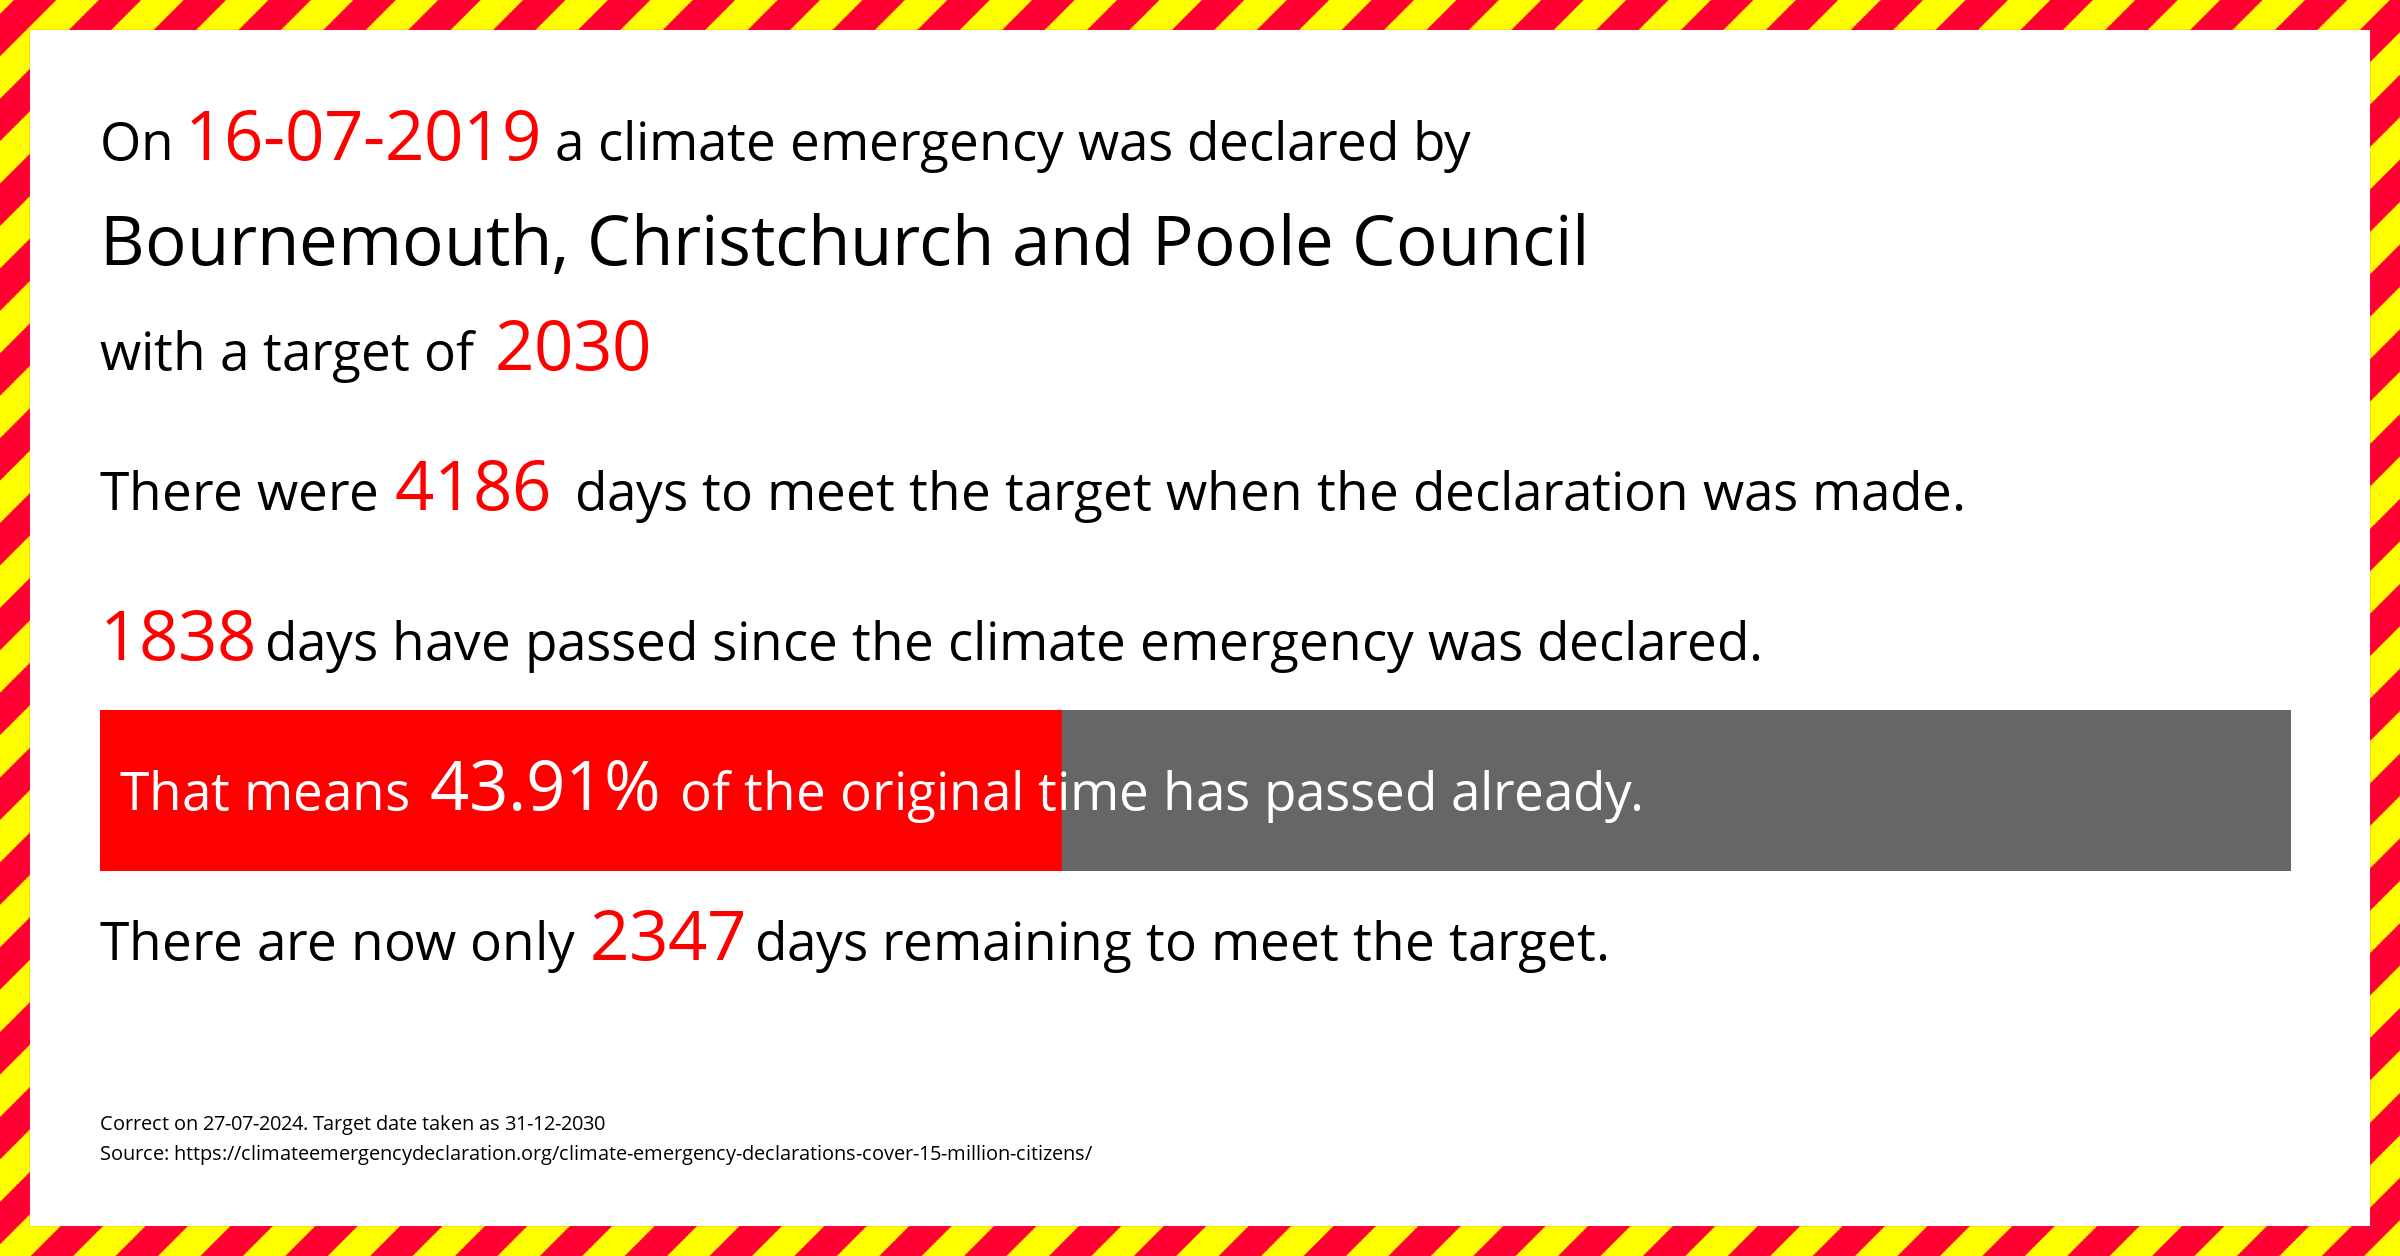 Bournemouth, Christchurch and Poole Council declared a Climate emergency on Tuesday 16th July 2019, with a target of 2030.